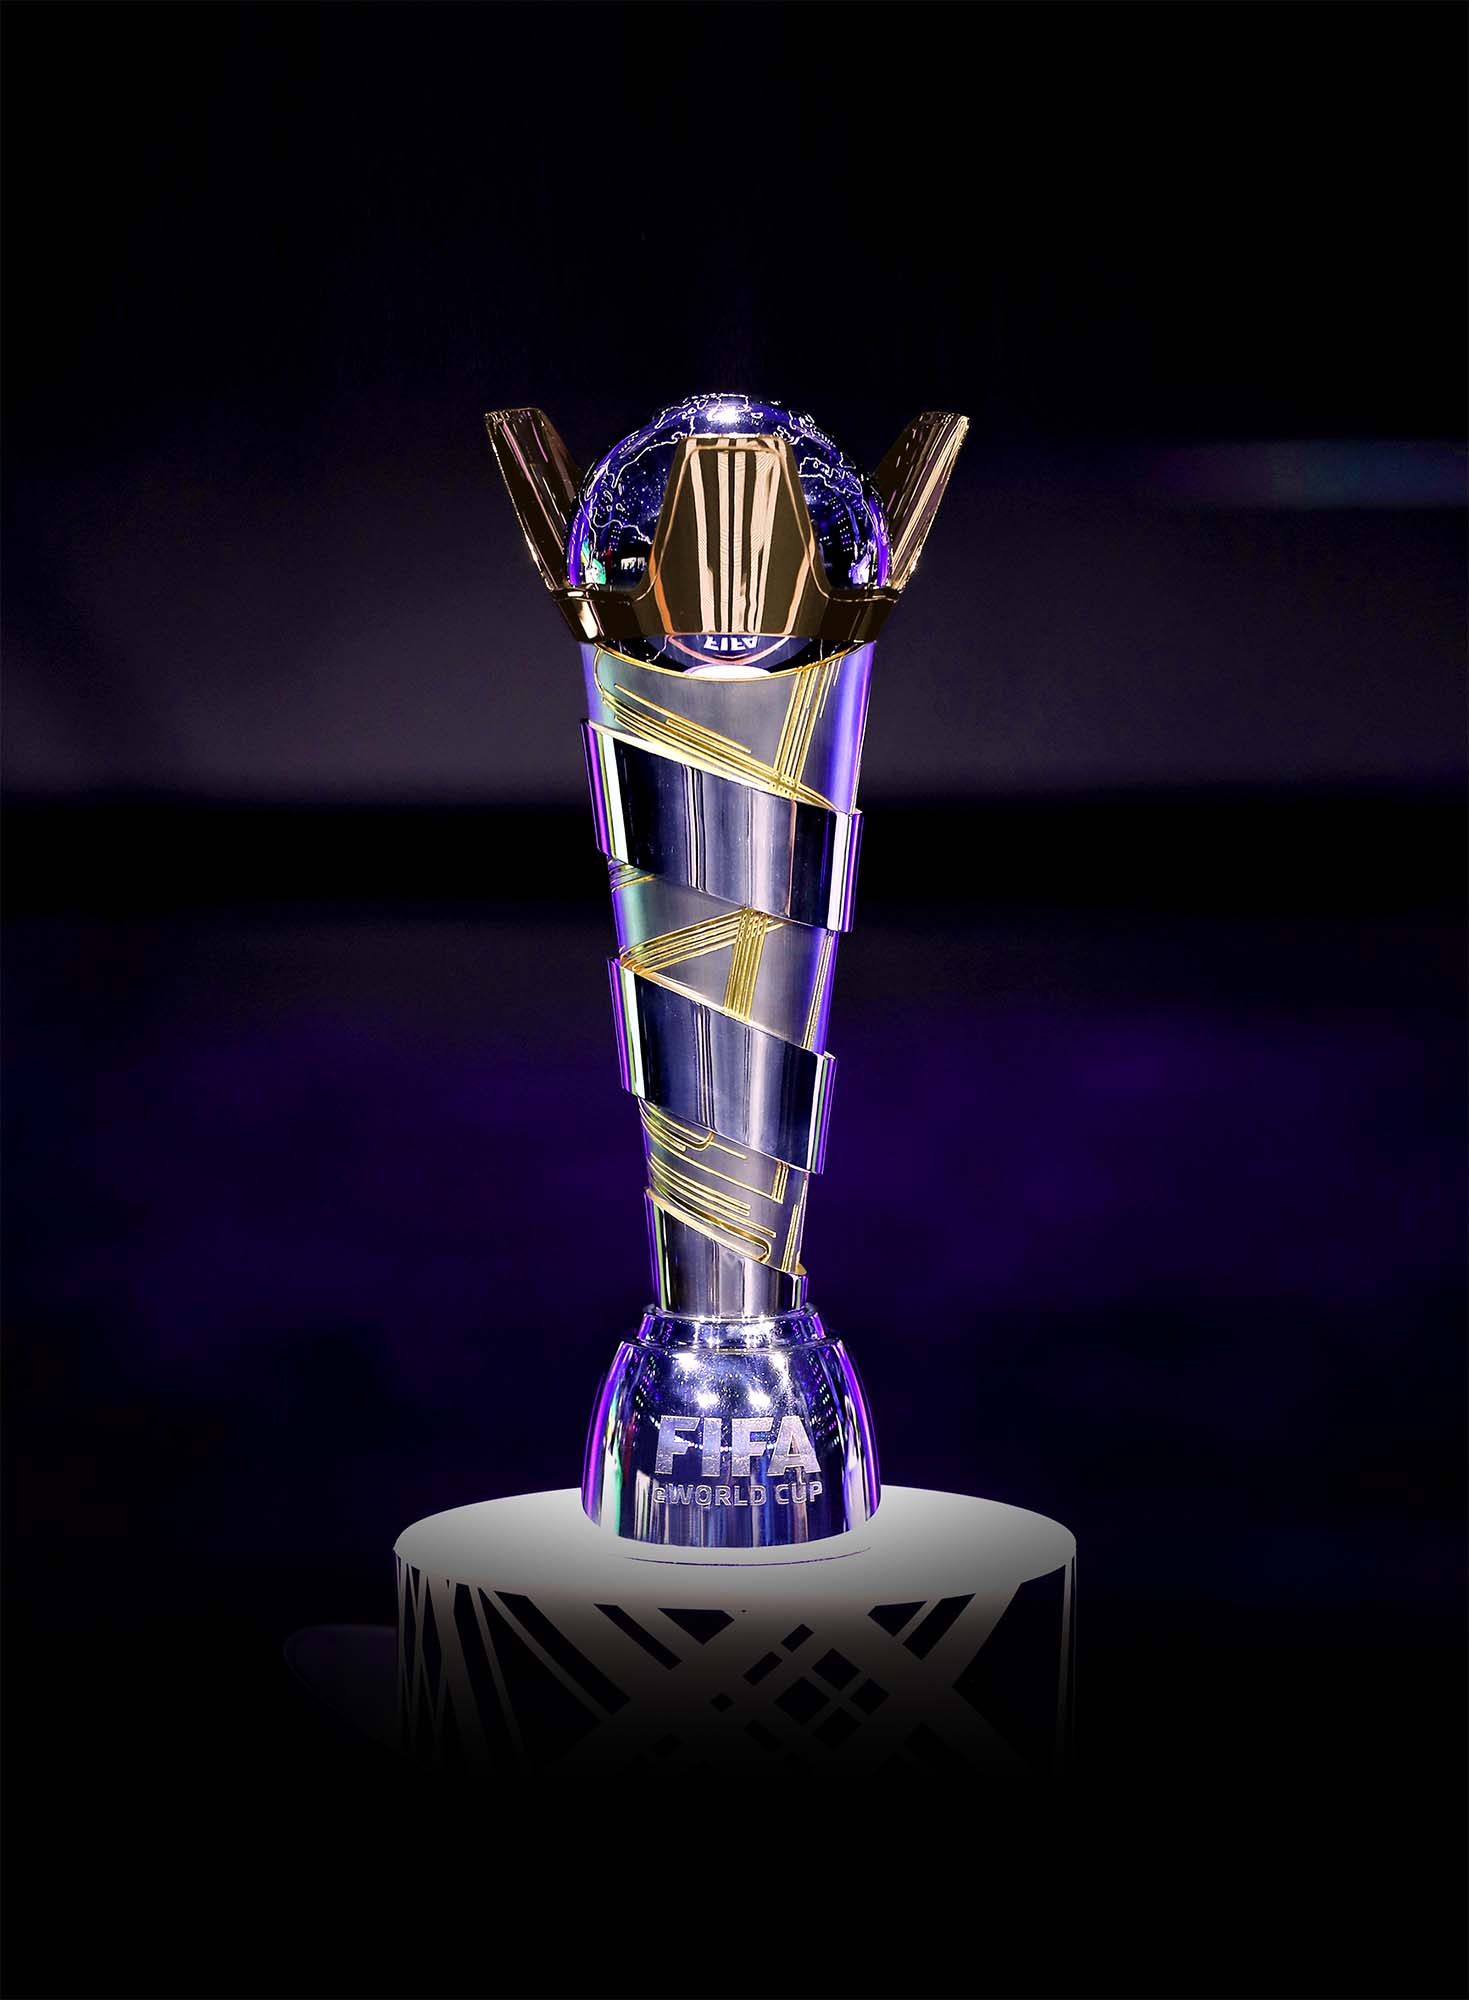 Designers and Makers of the FIFAe World Cup Trophy Thomas Lyte